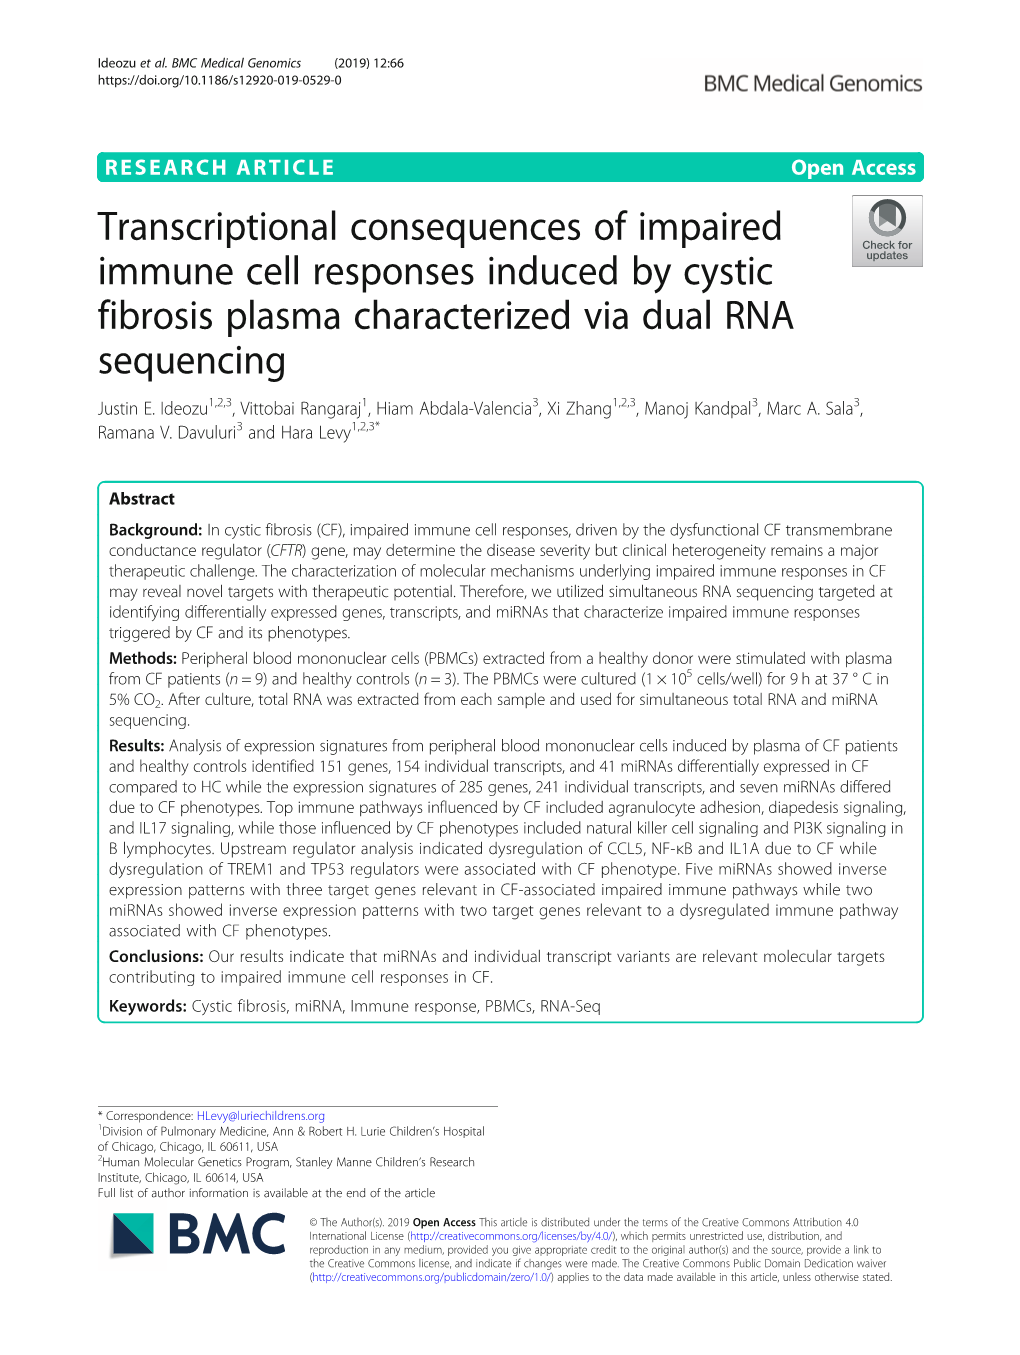 Transcriptional Consequences of Impaired Immune Cell Responses Induced by Cystic Fibrosis Plasma Characterized Via Dual RNA Sequencing Justin E